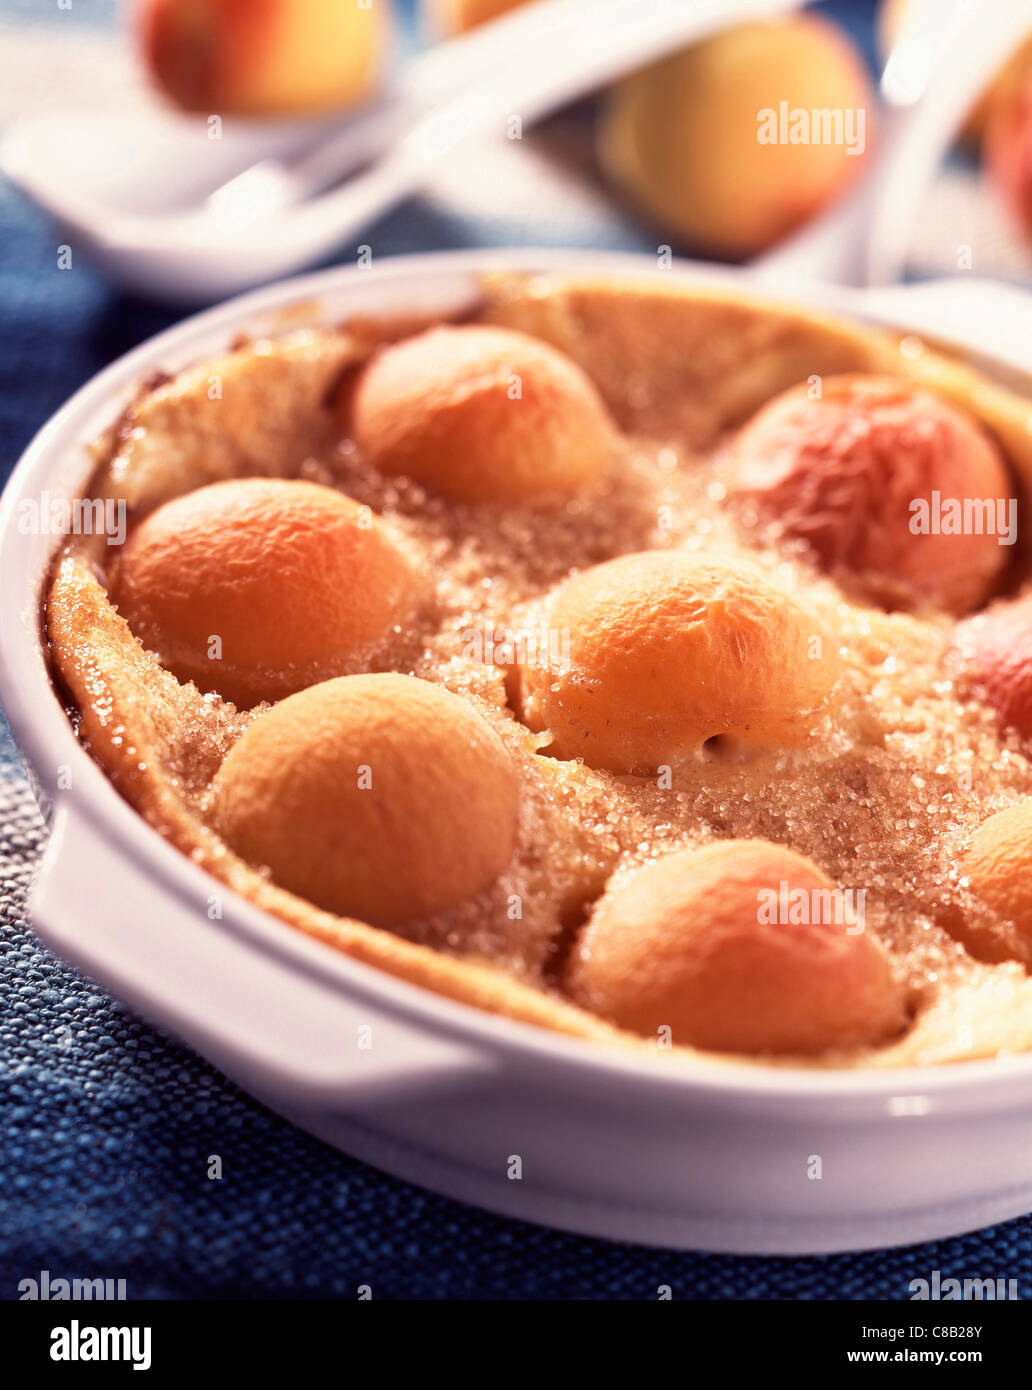 Warm Clafouti batter pudding with apricots Stock Photo